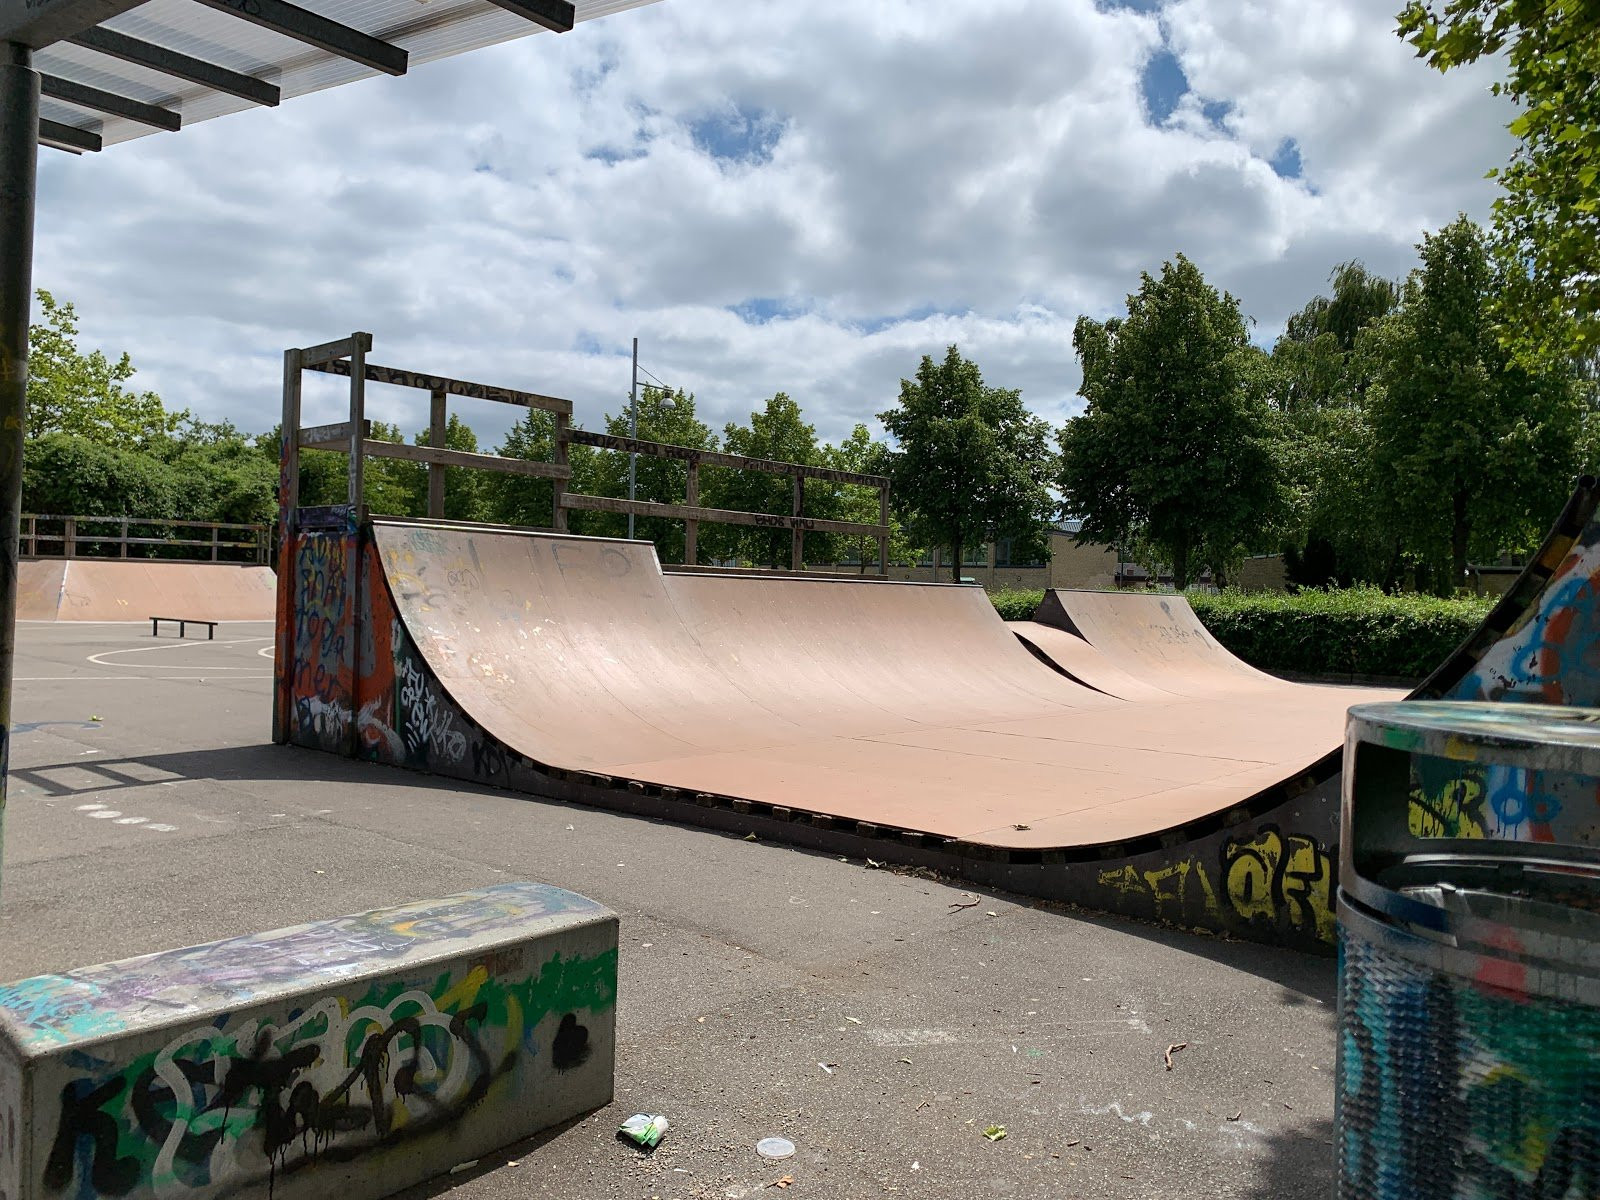 Unfortunately, there is no information or any pictures from this skatepark yet. We would like to gather as much information as possible about Denmark’s skateparks on our site, so we would love your inputs.Do you have any pictures of the park, general information or would you like to describe it for us, please&nbsp;don’t hesitate to make an edit or any changes.Thanks a lot for your help!